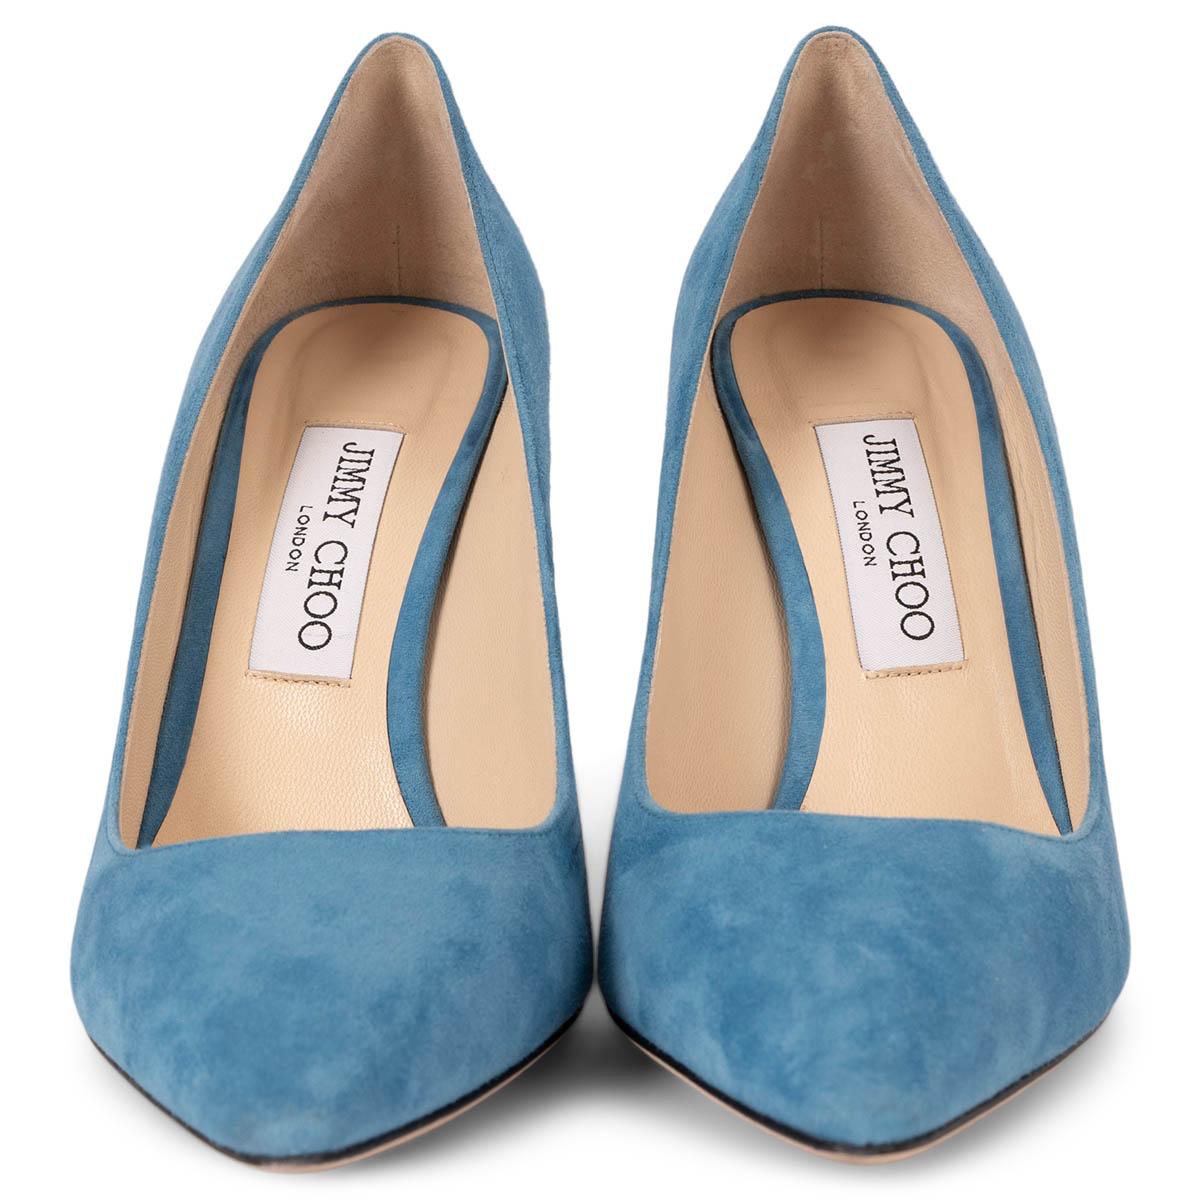 100% authentic Jimmy Choo Romy 100 in robot blue suede with a pointed-toe. Have been worn and are in excellent condition. 

Measurements
Imprinted Size	38.5
Shoe Size	38.5
Inside Sole	25.5cm (9.9in)
Width	7.5cm (2.9in)
Heel	10cm (3.9in)

All our